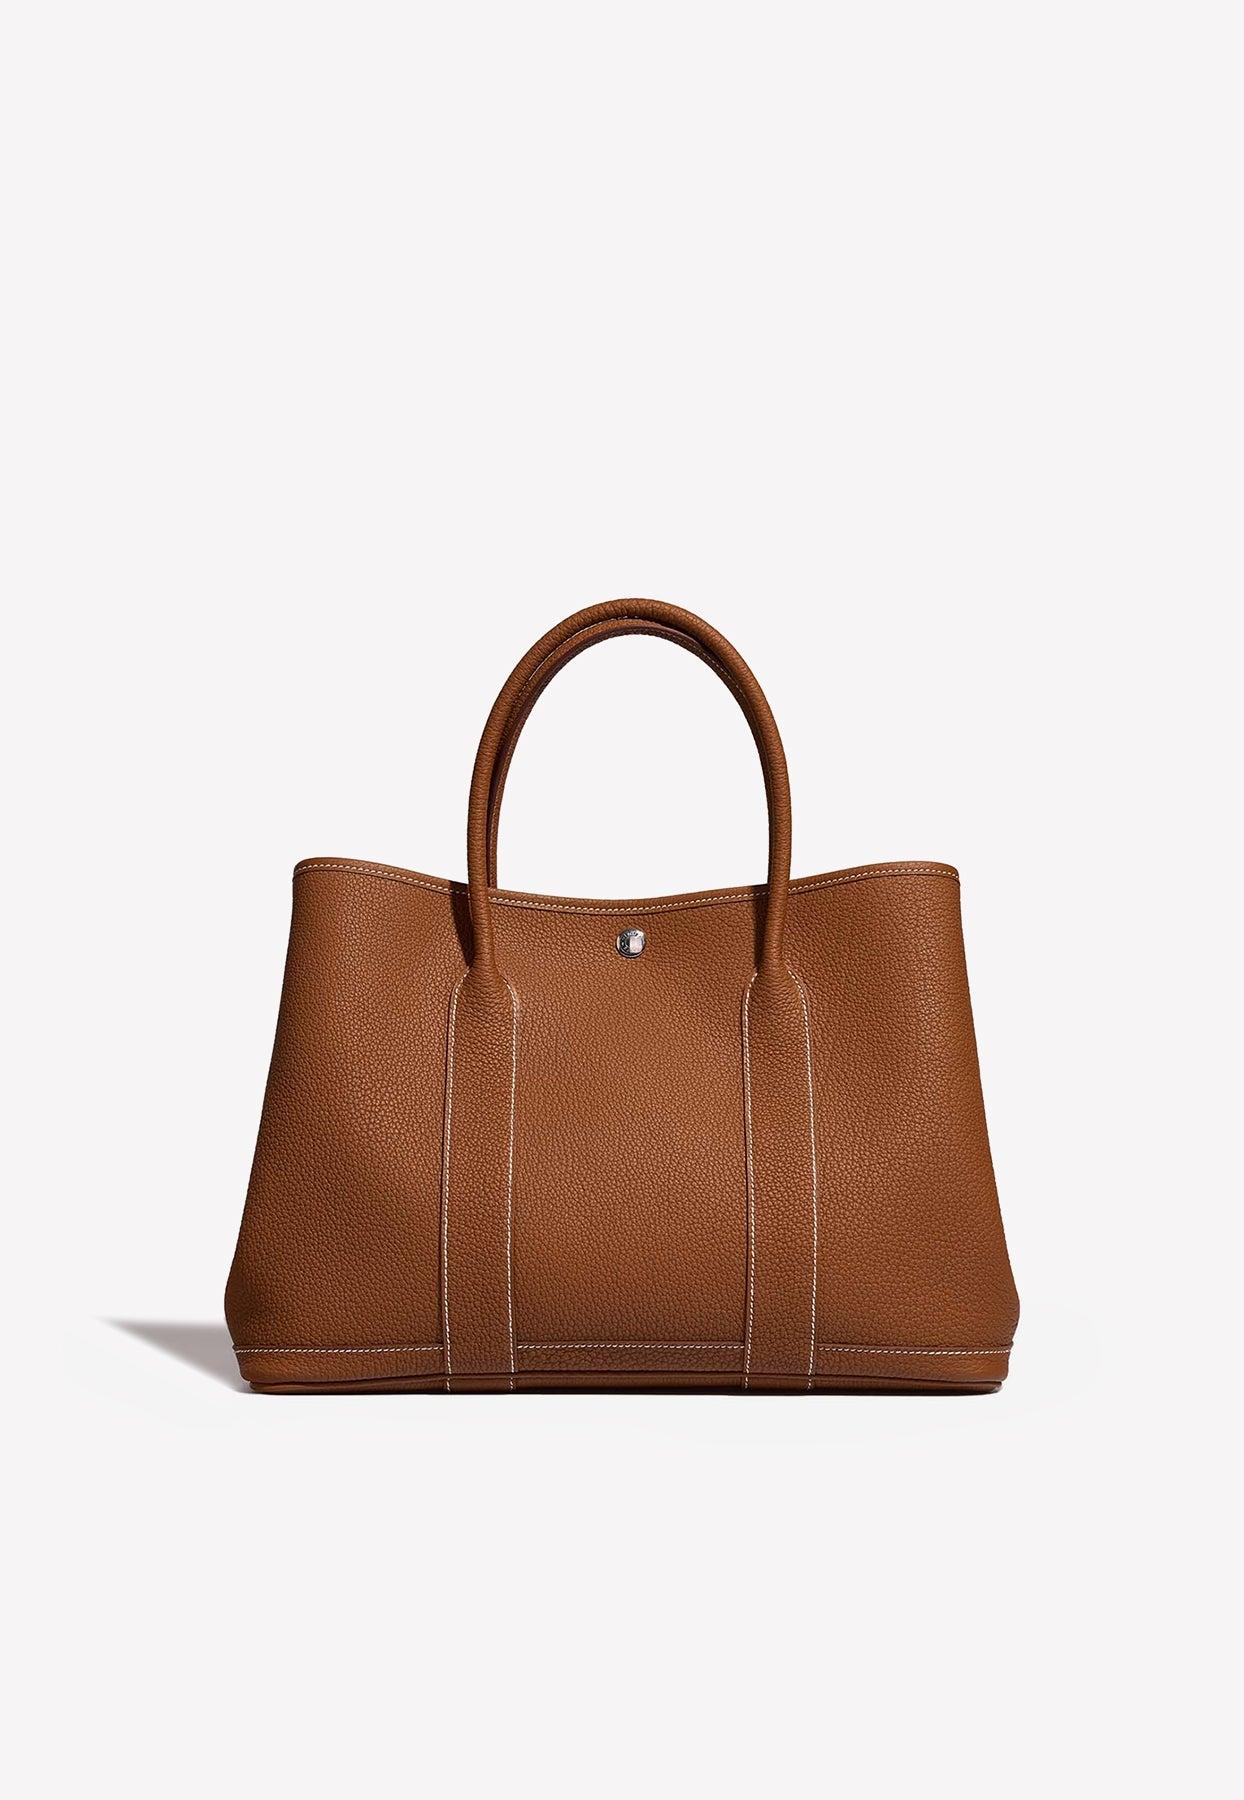 Hermes Garden Party TPM Leather Tote Bag in Tan color